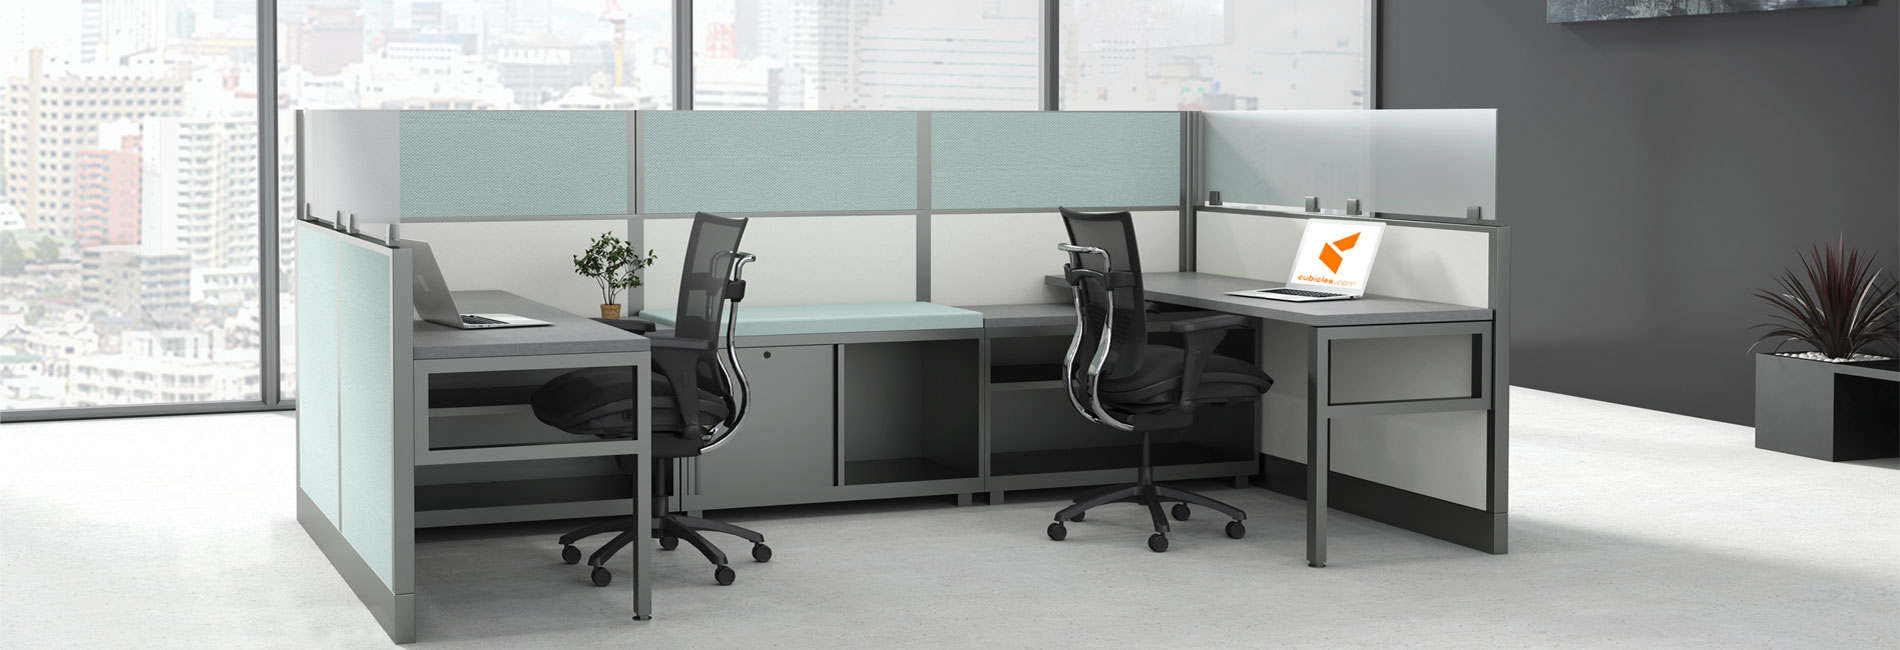 standard sizes of office cubicles  cubicle